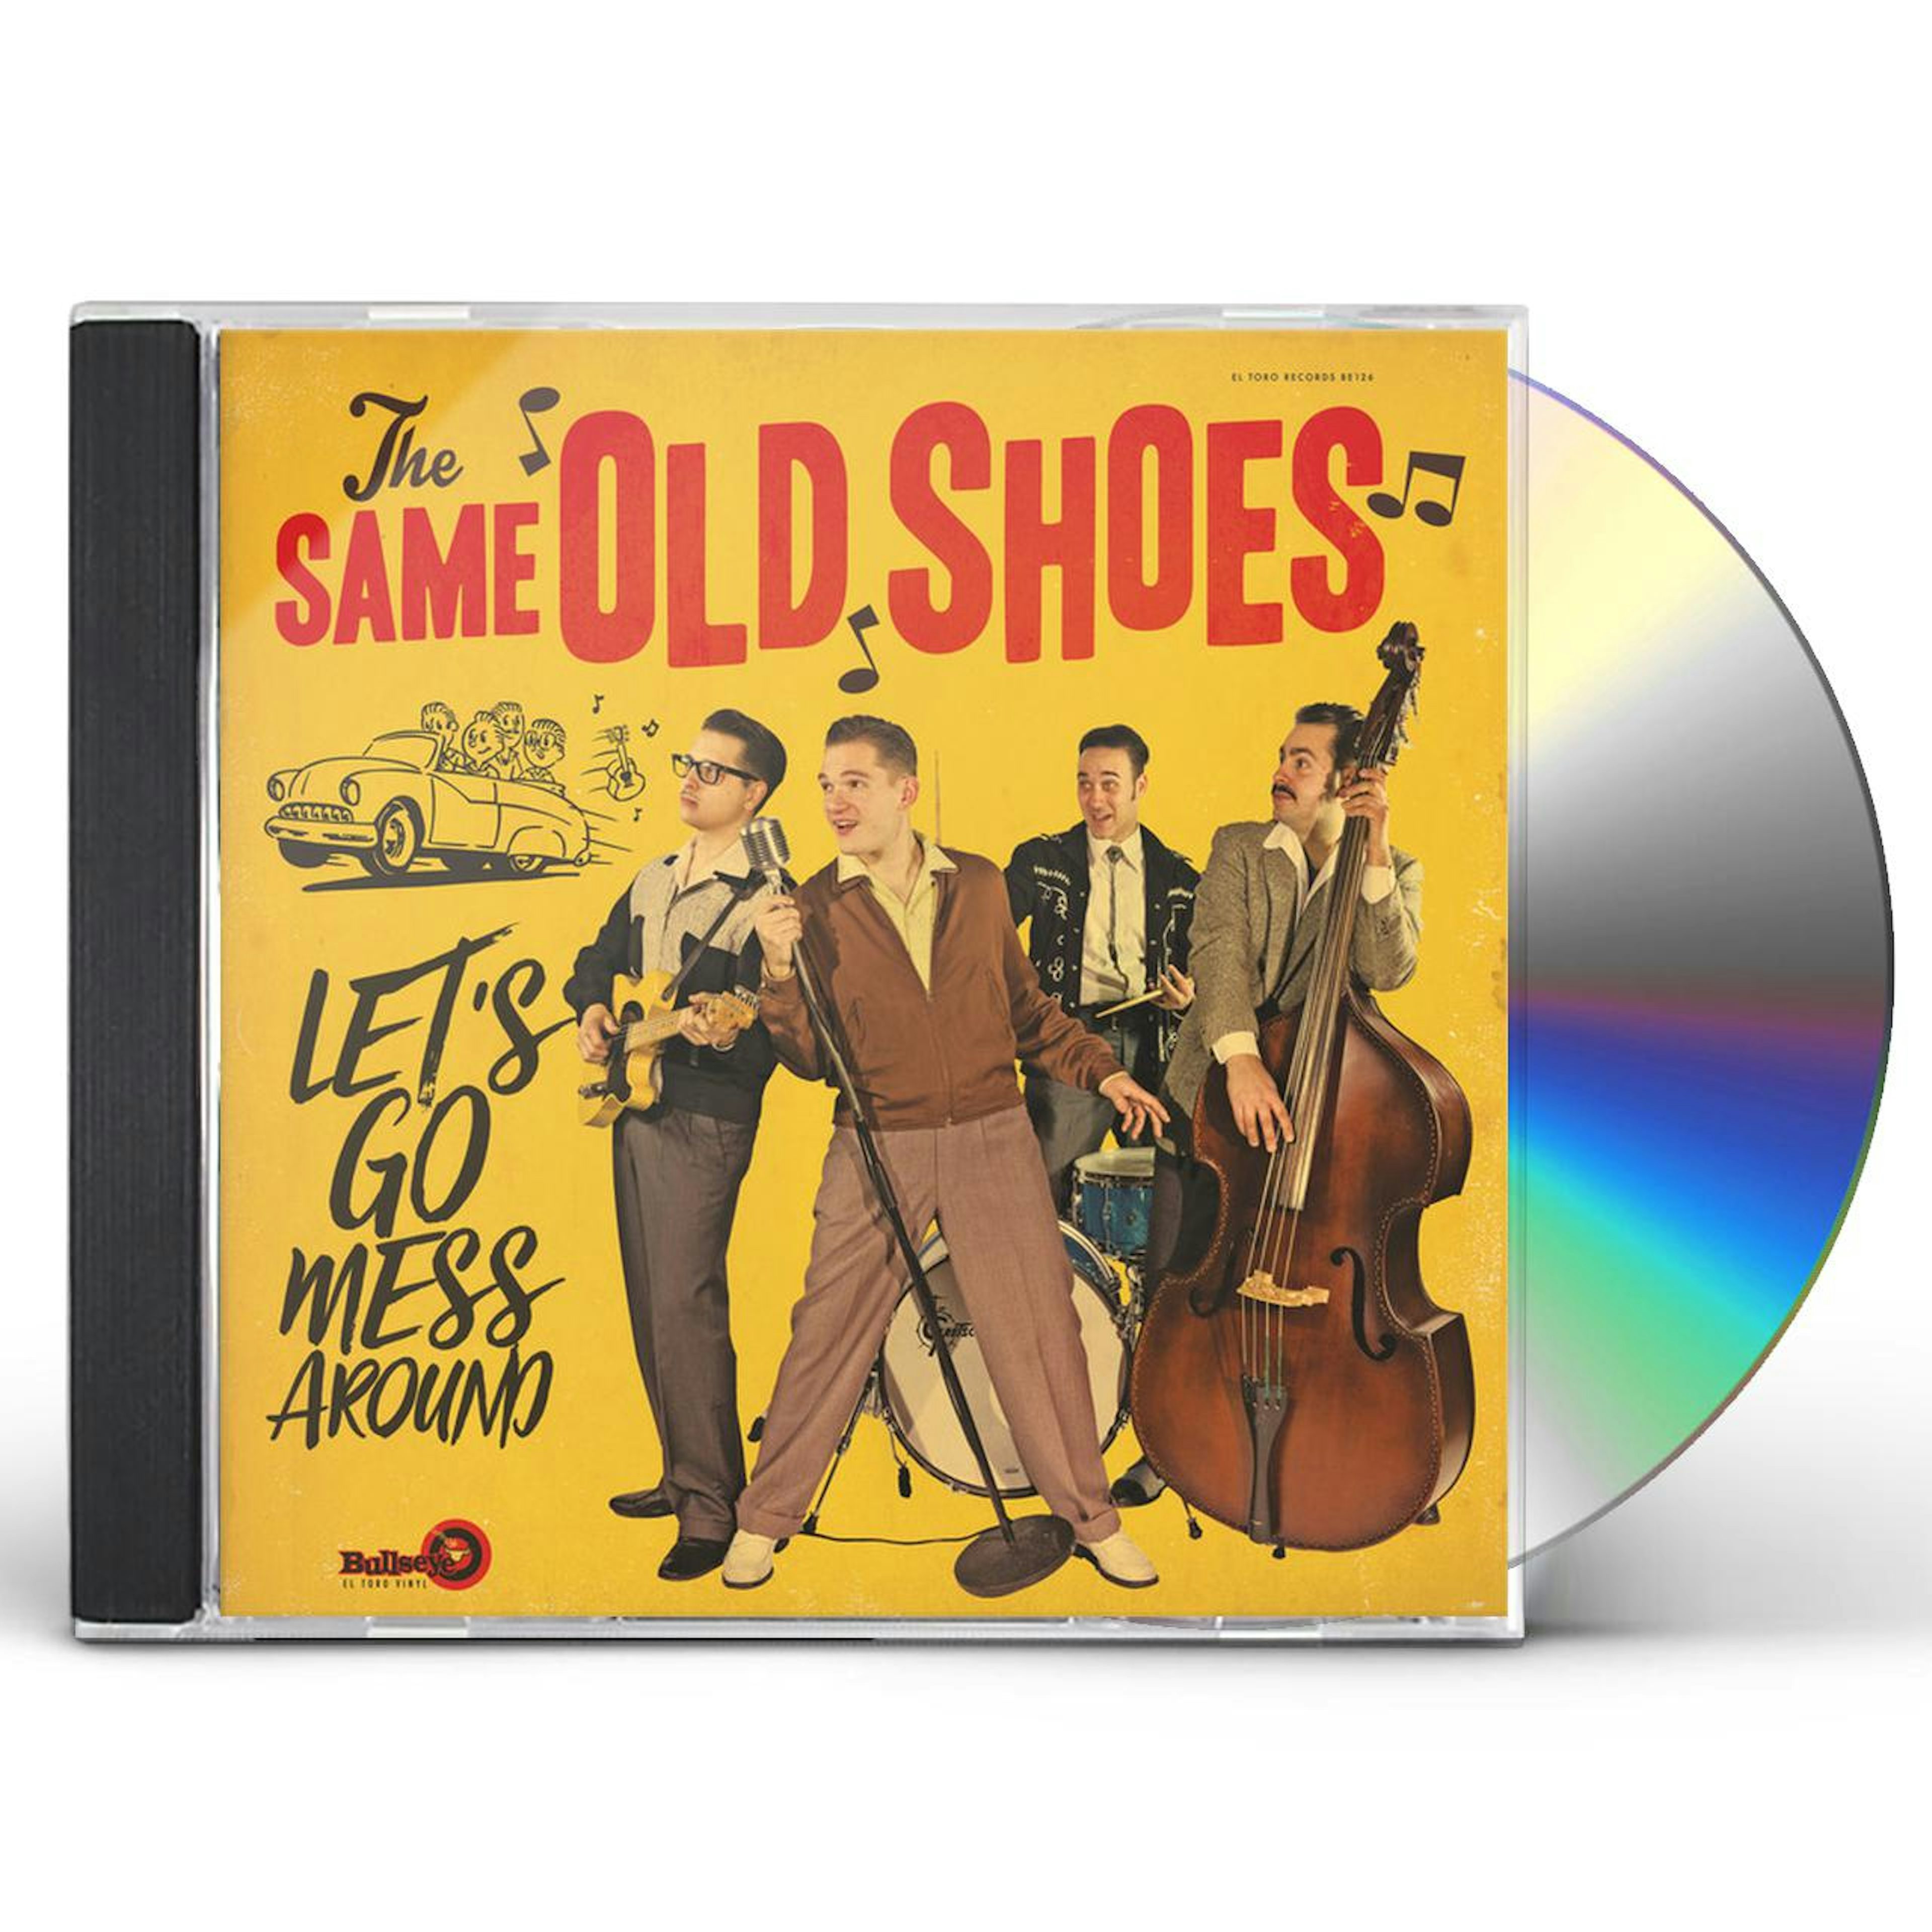 The Same Old Shoes LET'S GO MESS AROUND CD